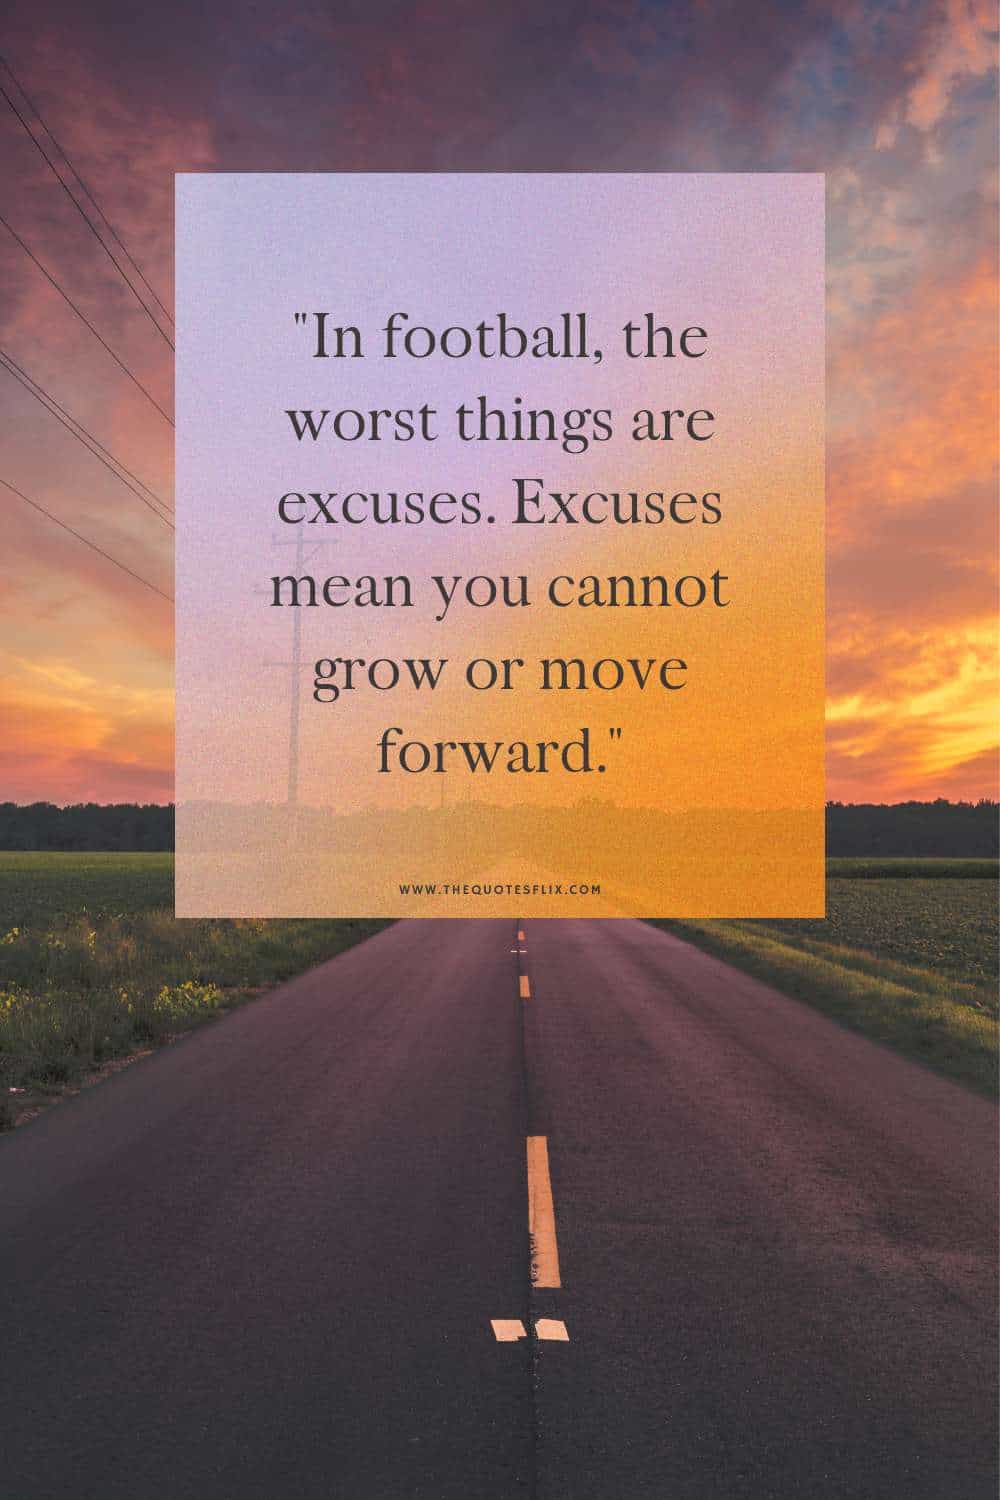 inspirational football quotes - worst things are excuses in football